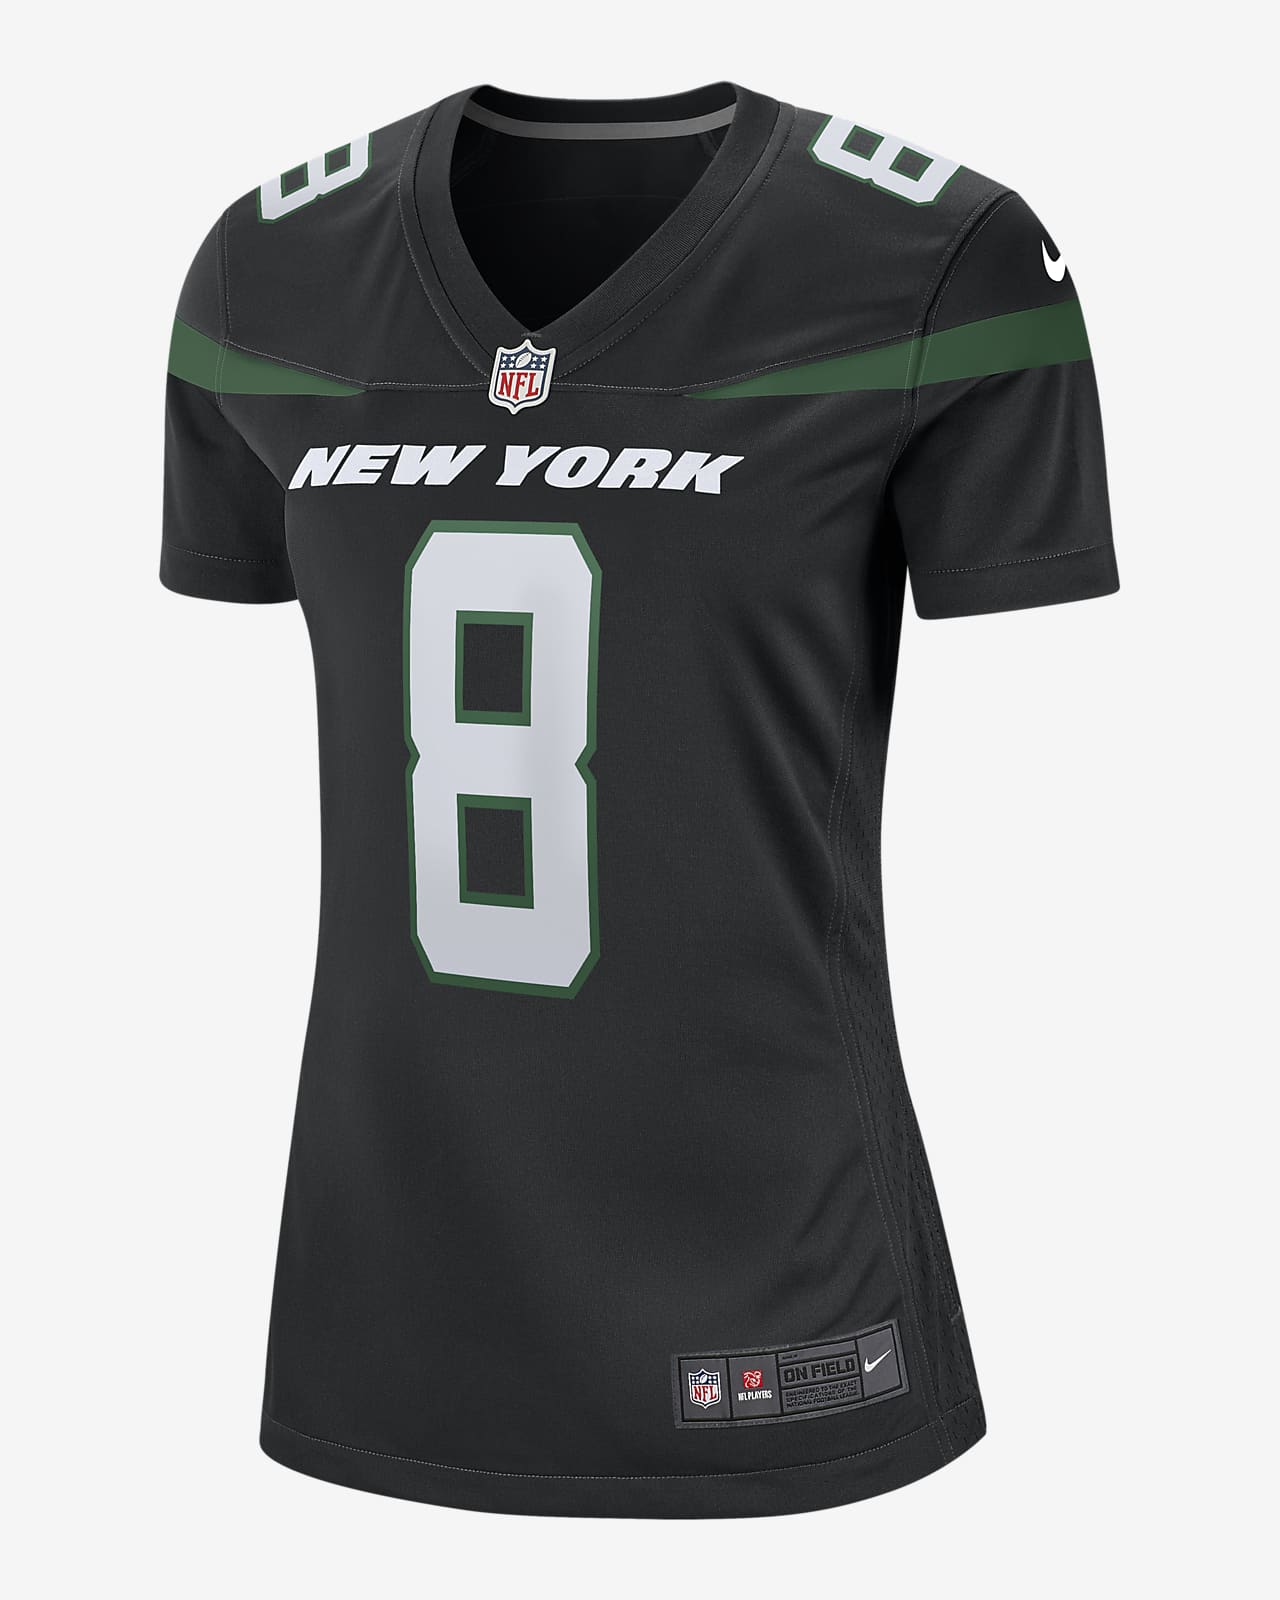 Aaron Rodgers New York Jets Nike Women's NFL Game Football Jersey in Black, Size: Large | 67NWNJGA9ZF-00S